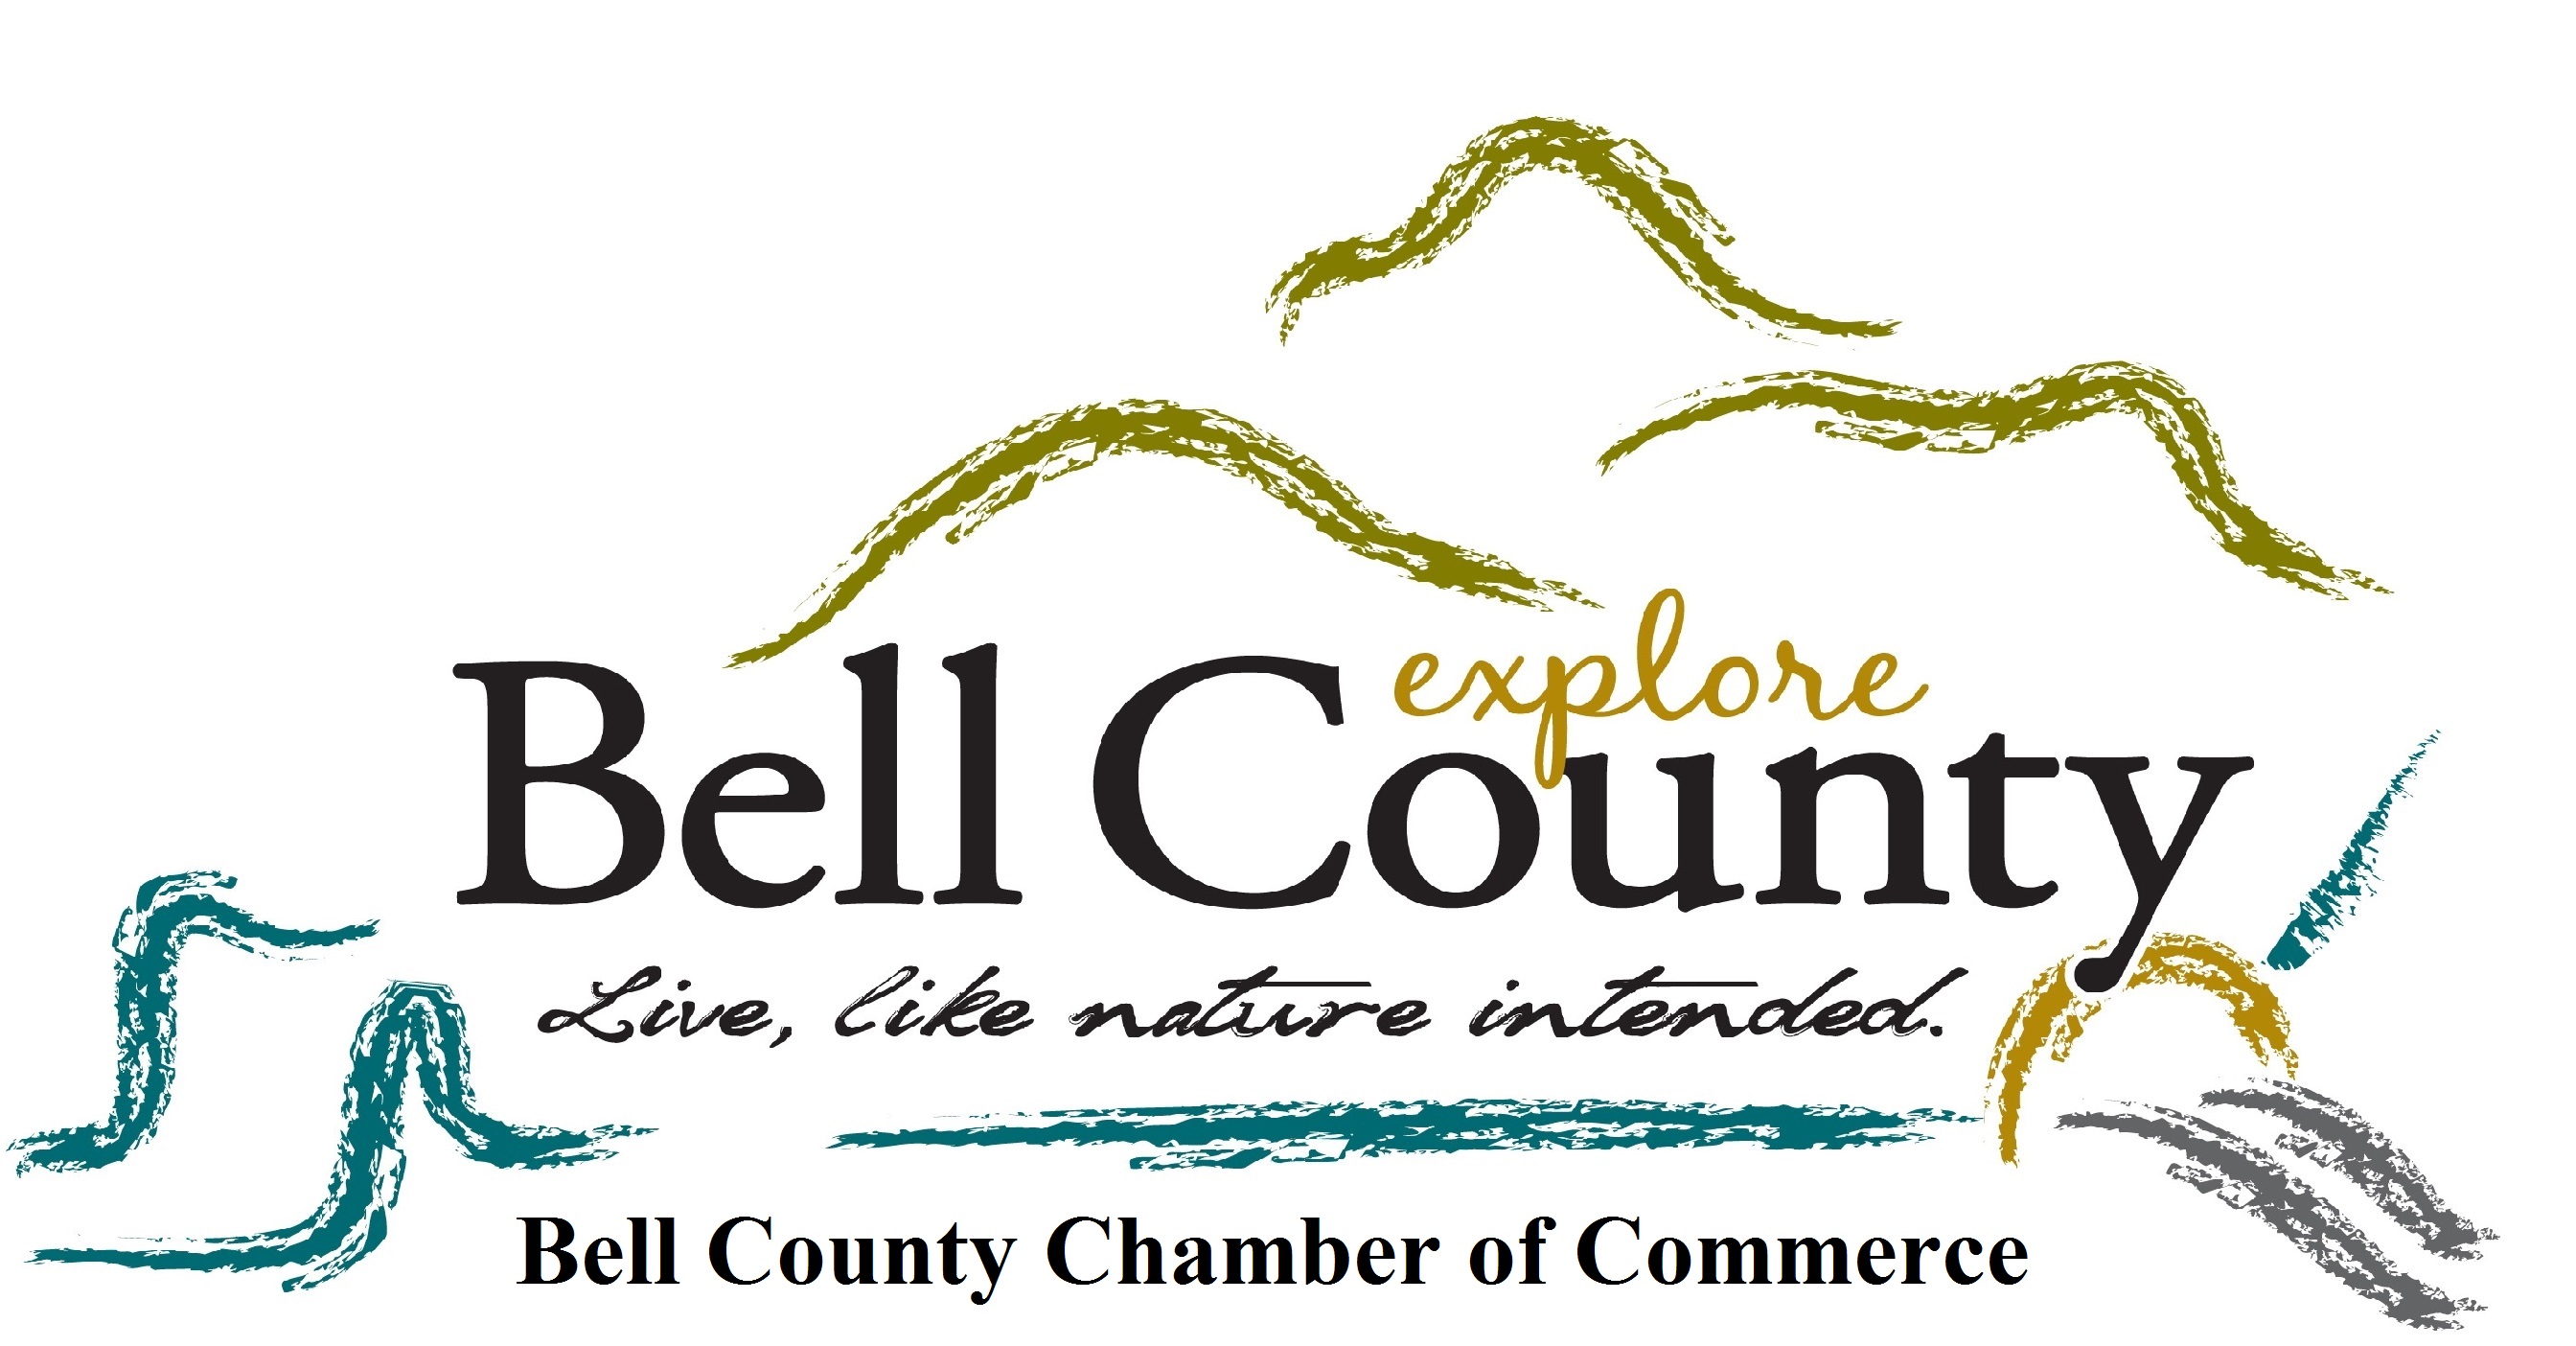 Bell County Chamber of Commerce